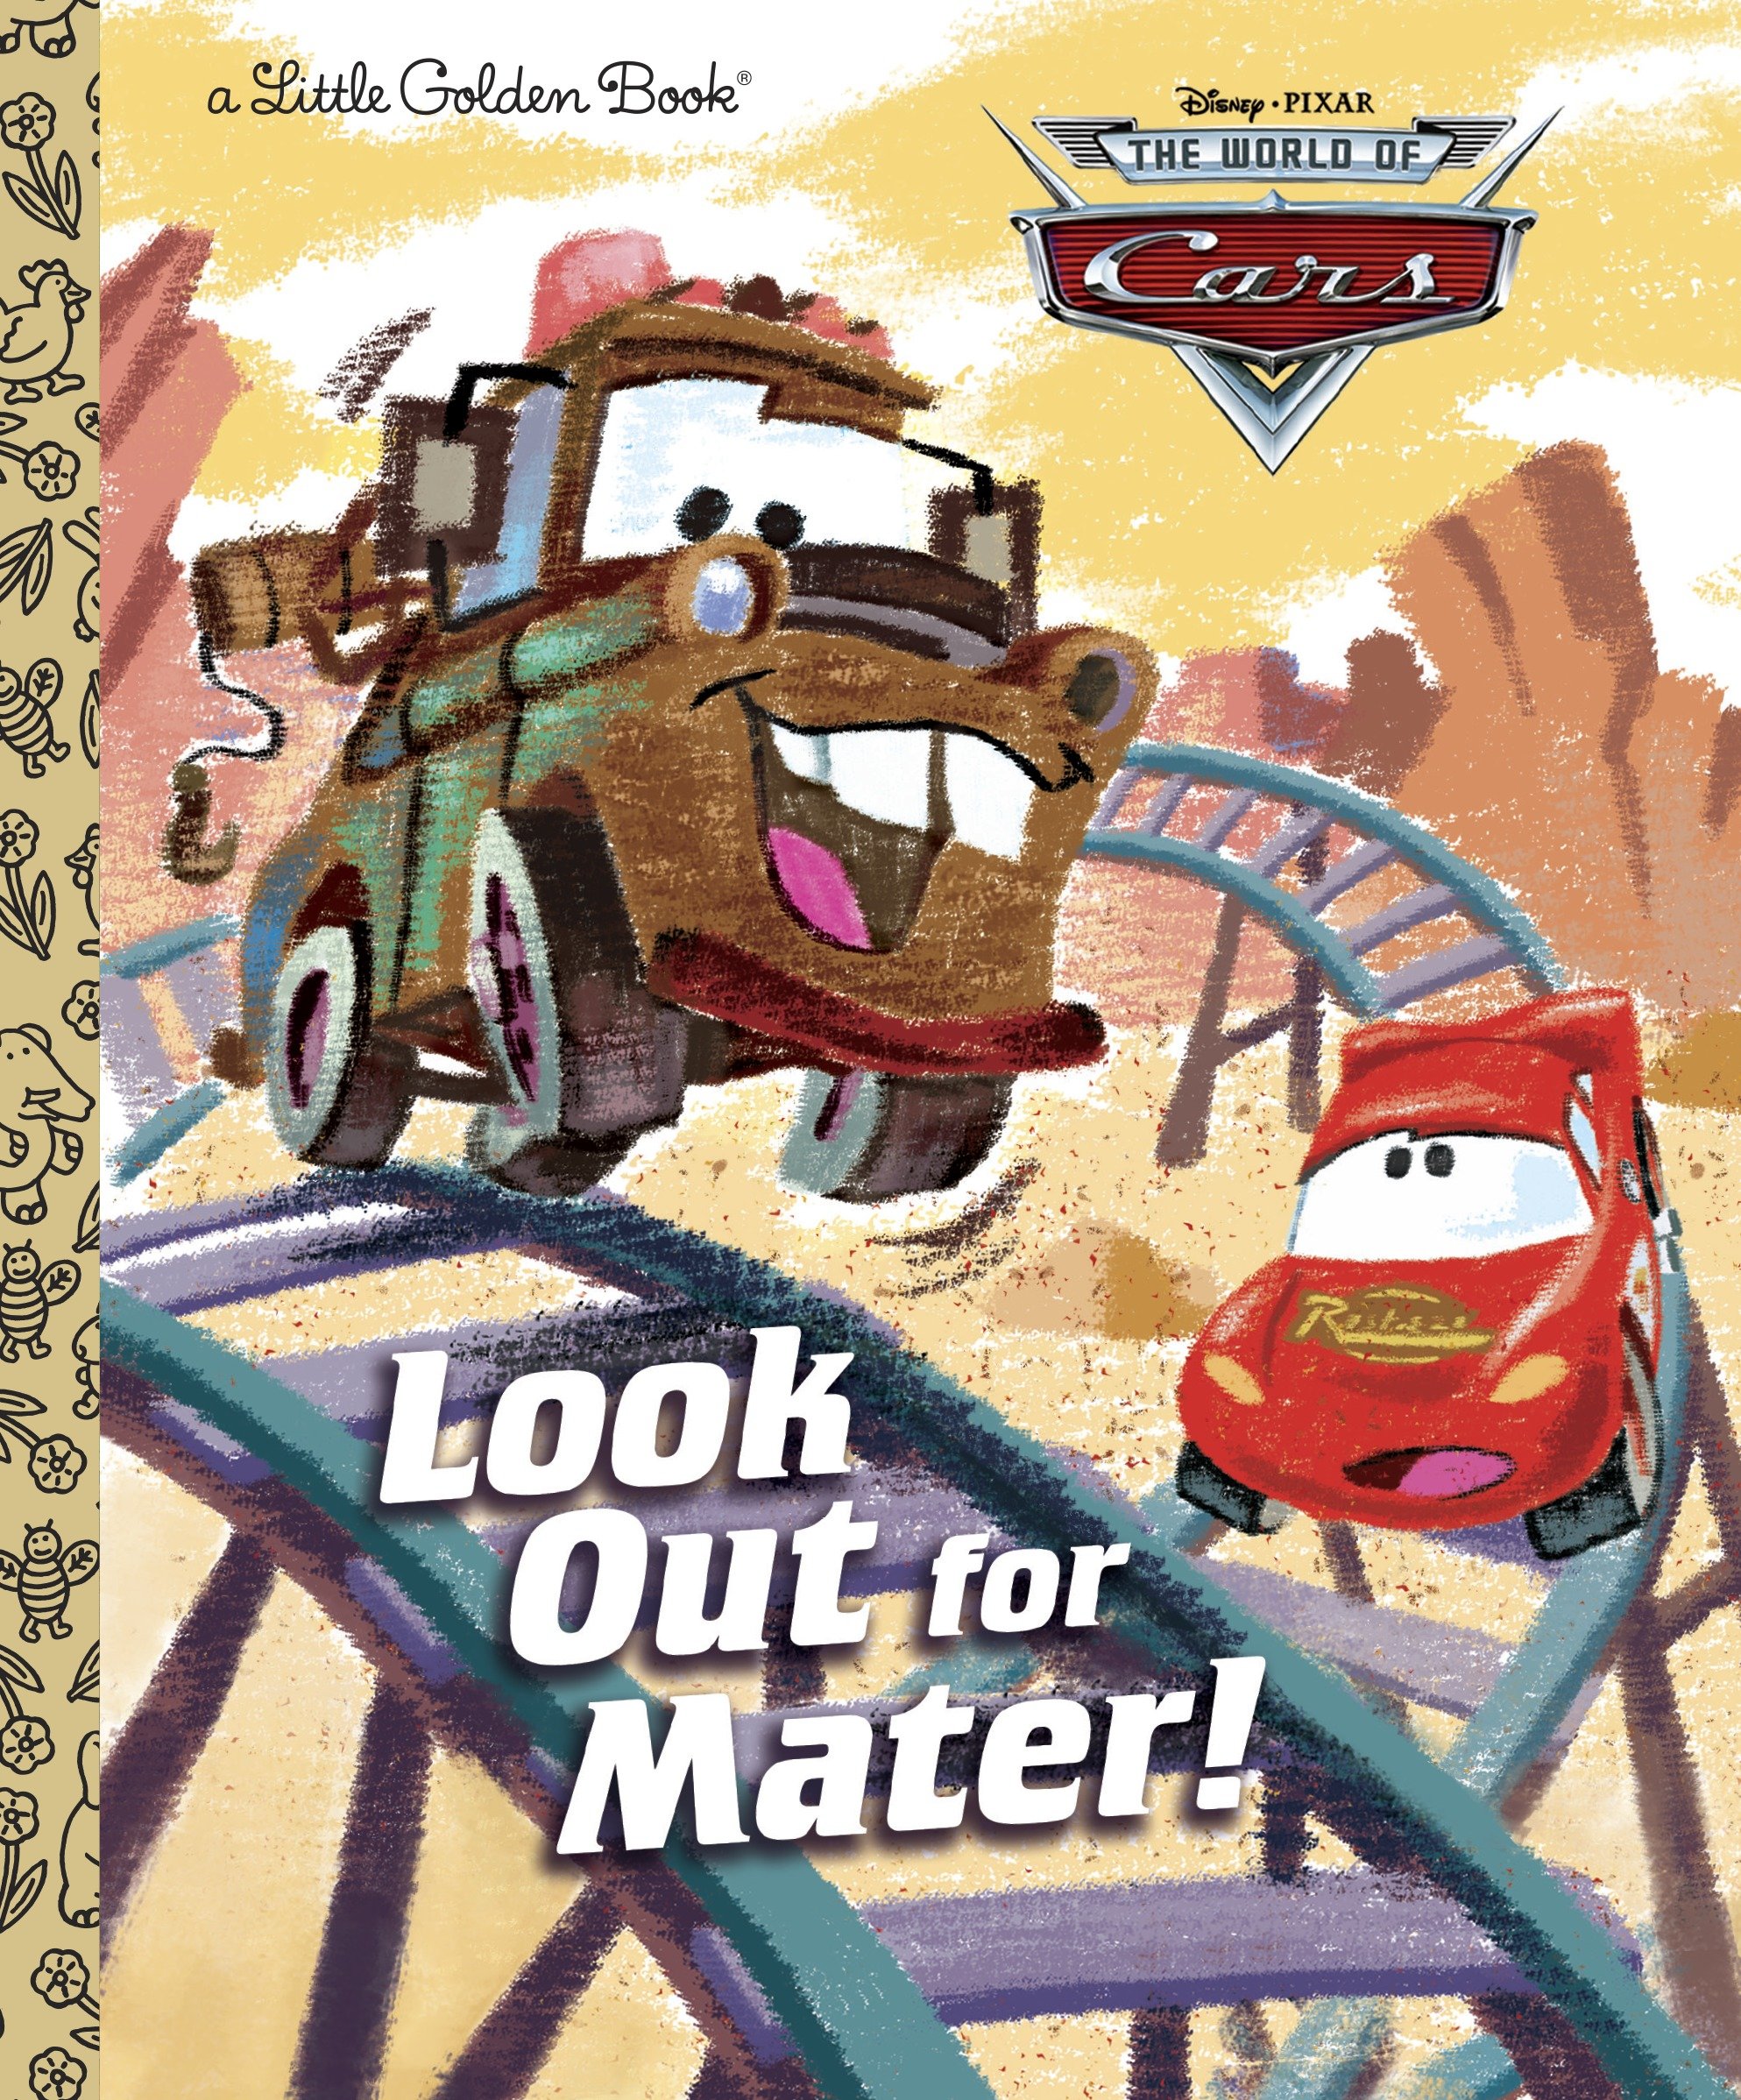 Cars: Look Out For Mater! Little Golden Book